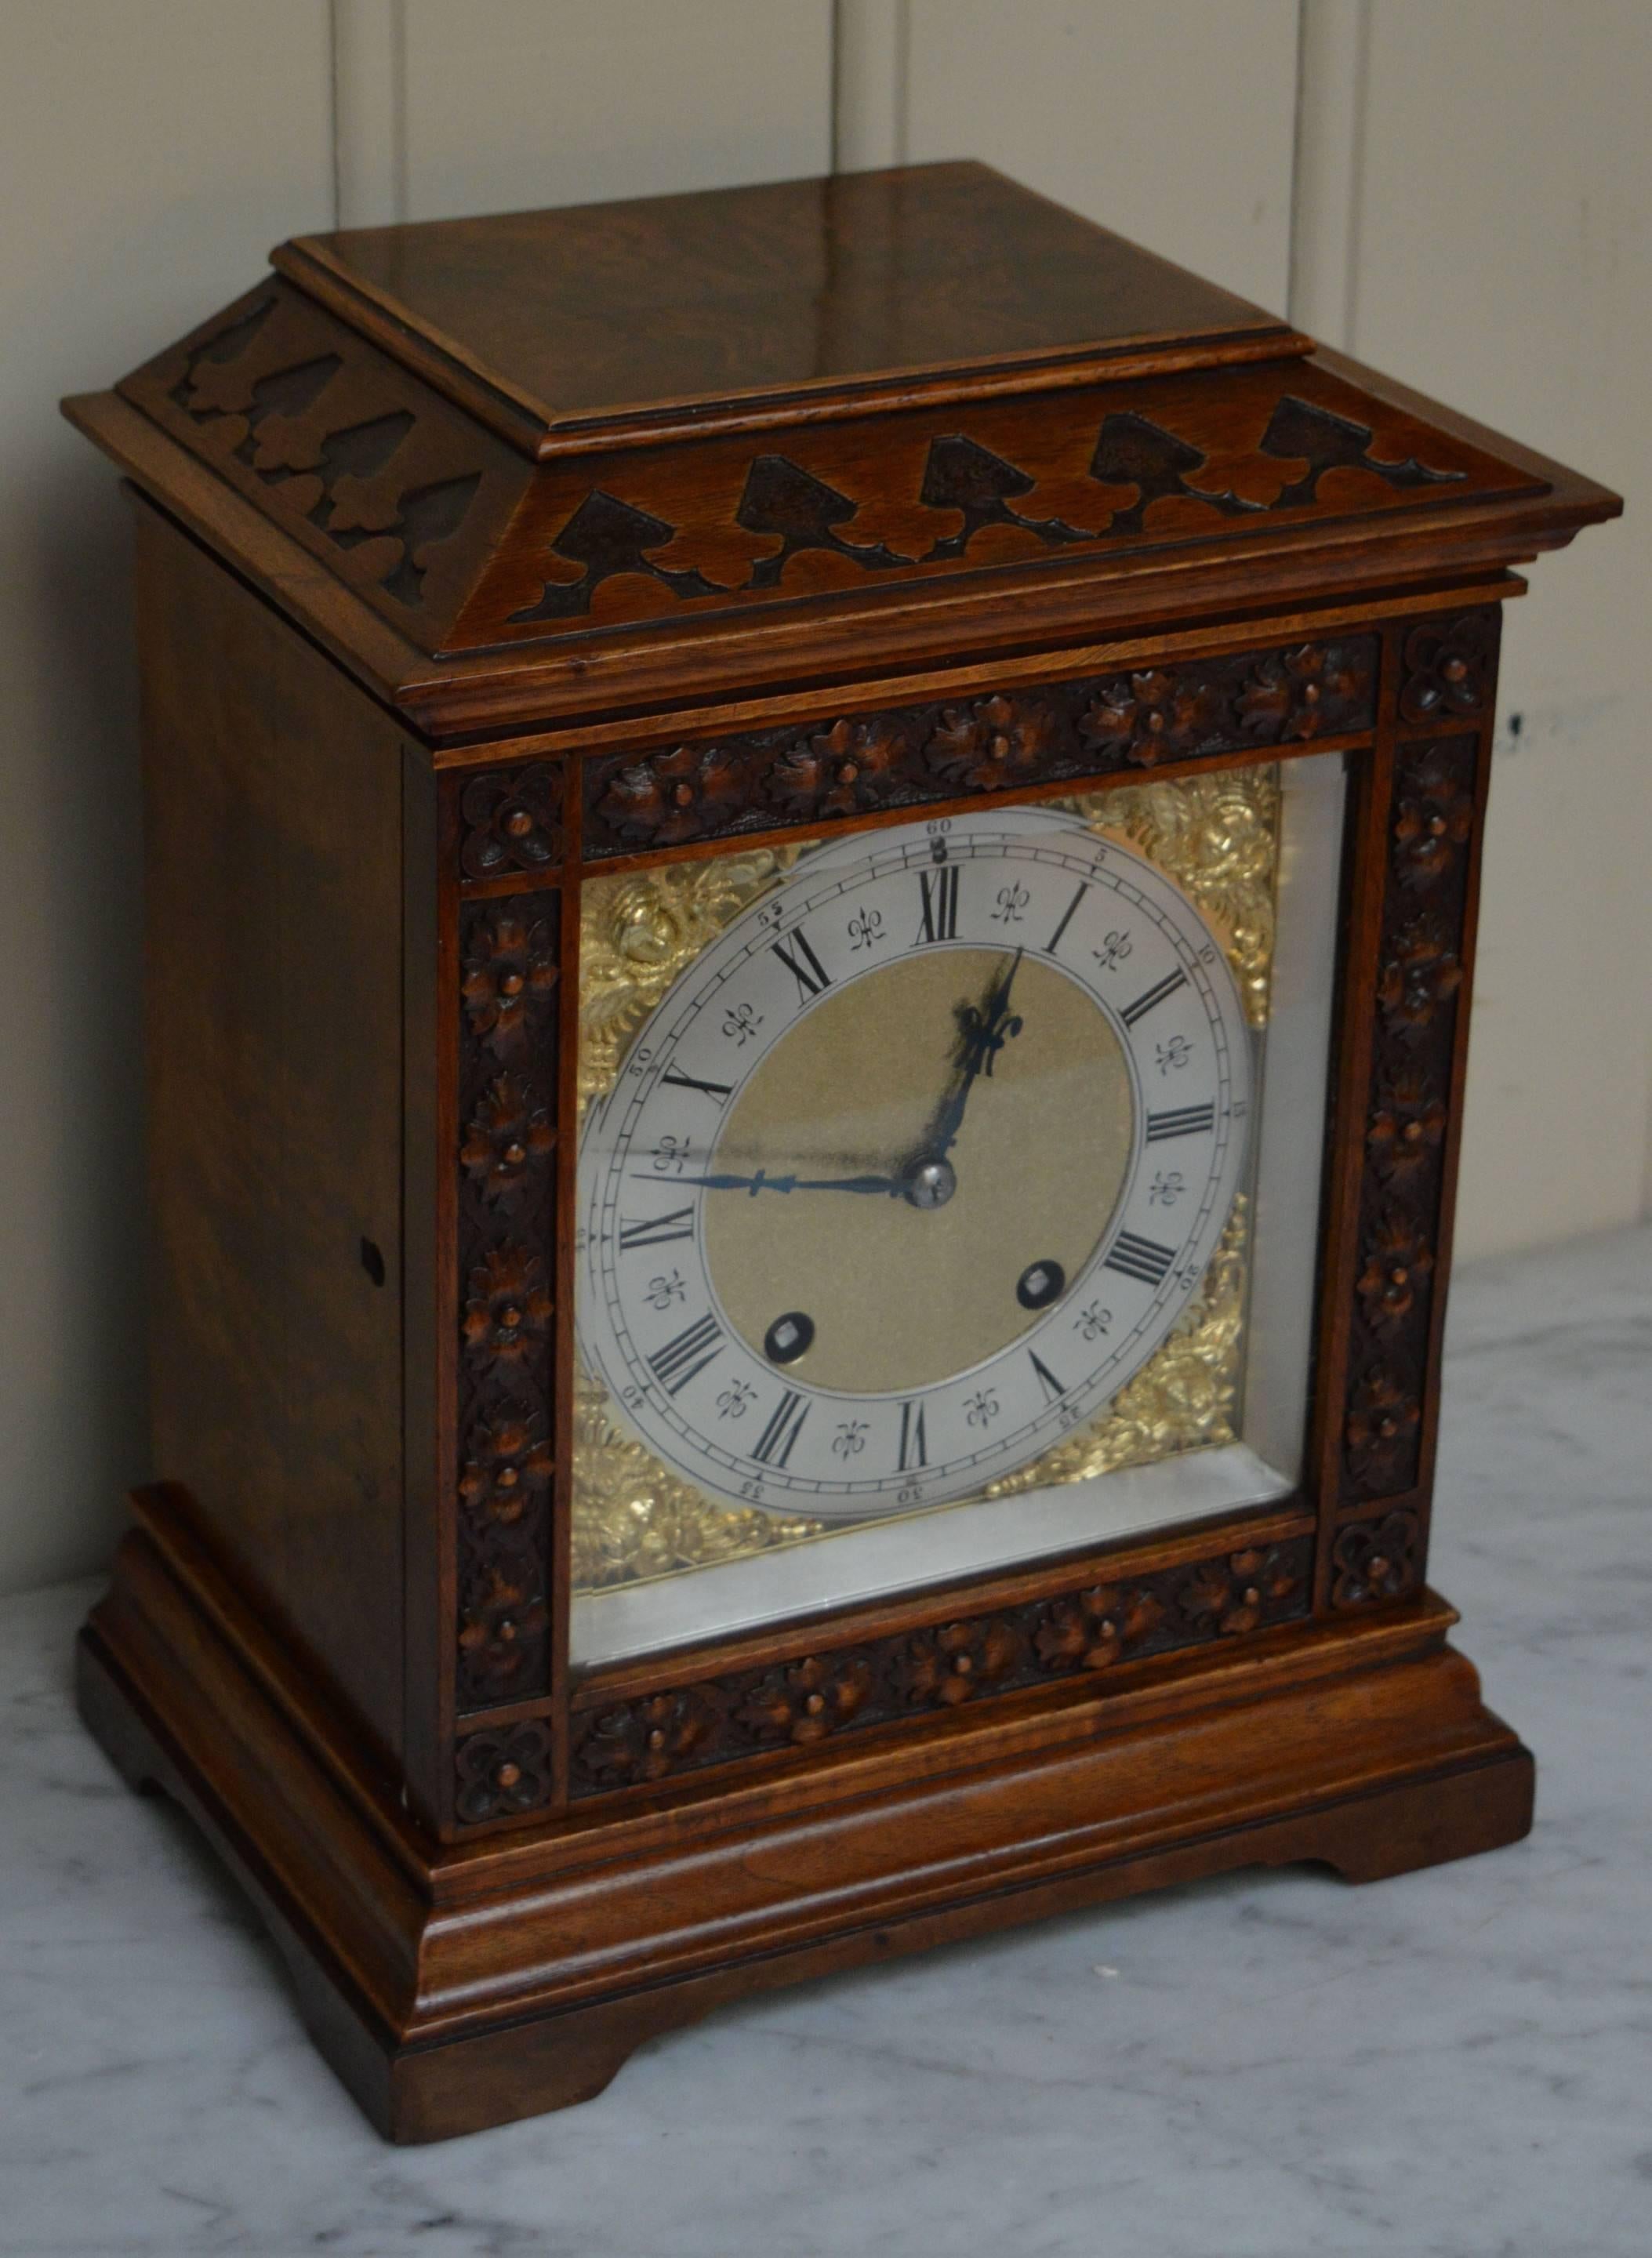 A nicely proportioned walnut ting tang bracket clock. It has a solid carved walnut and matched walnut veneer case, in the style of a late 17th Century bracket clock. It has a angled top, a carved door with a thick bevel edge glass and a stepped